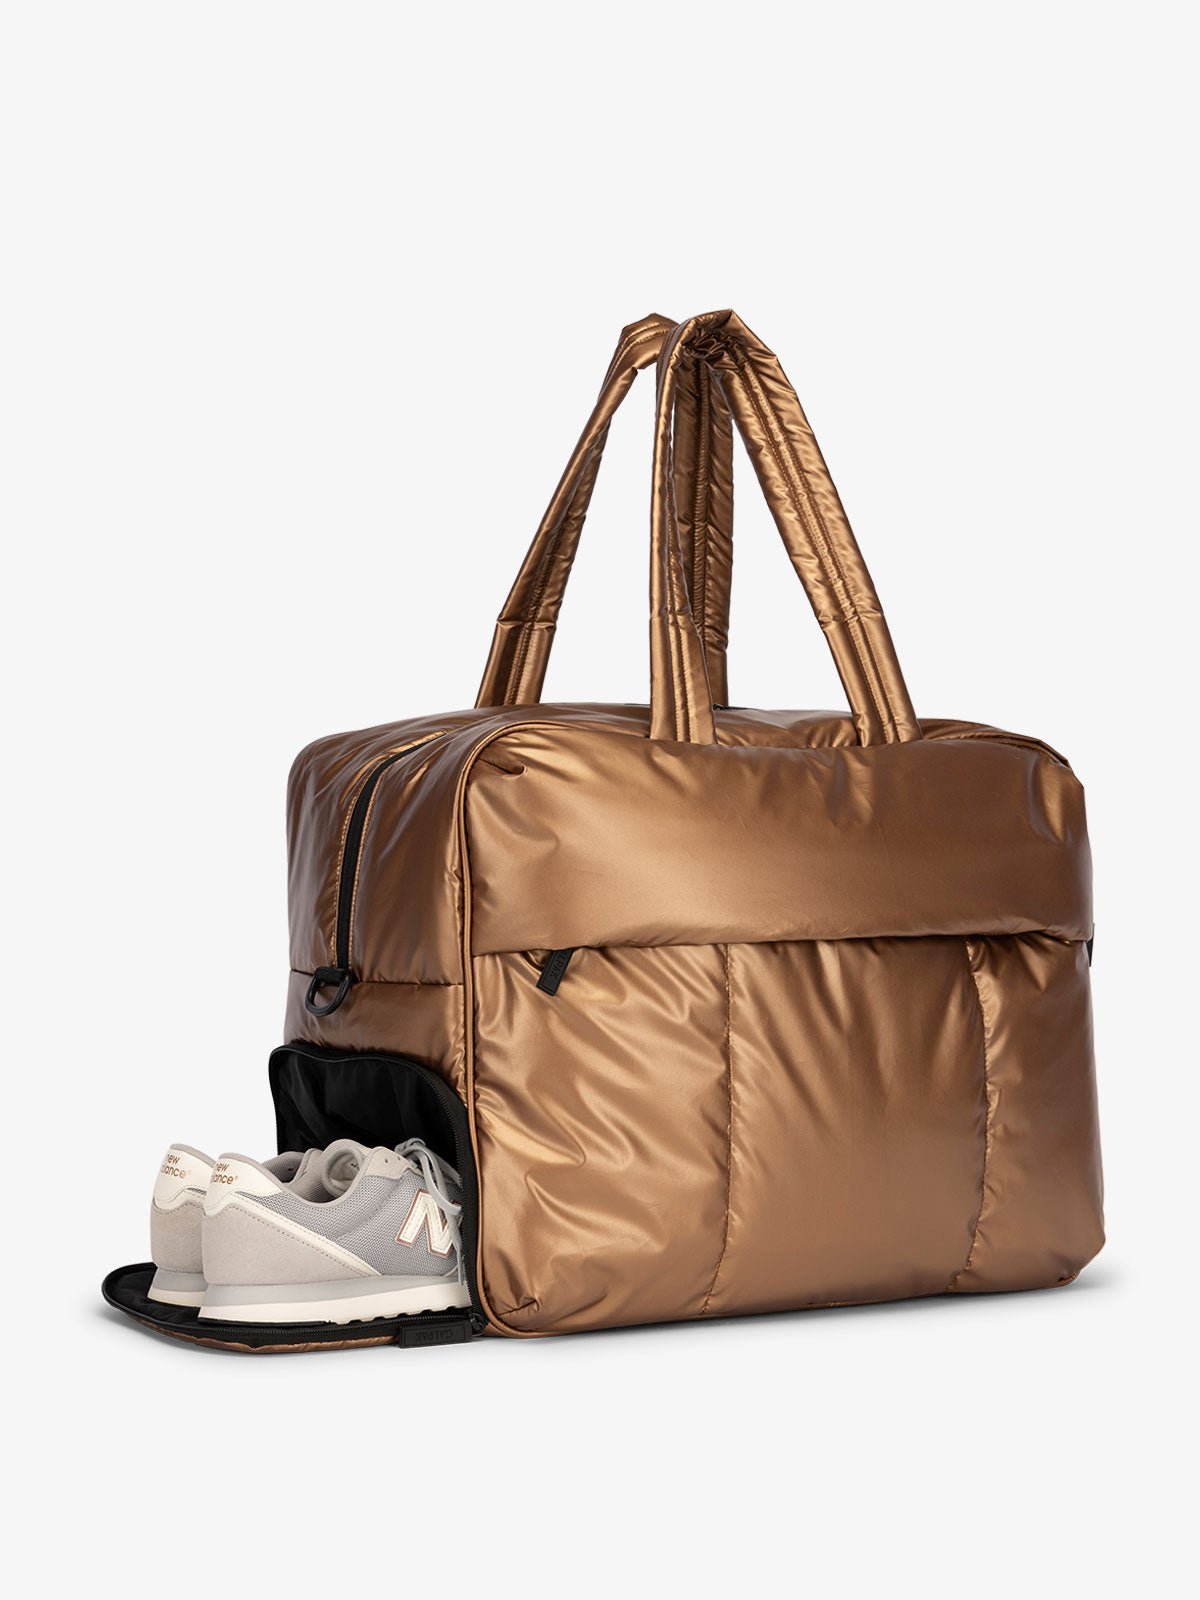 CALPAK Luka large duffel bag with side shoe compartment and dual handles in copper